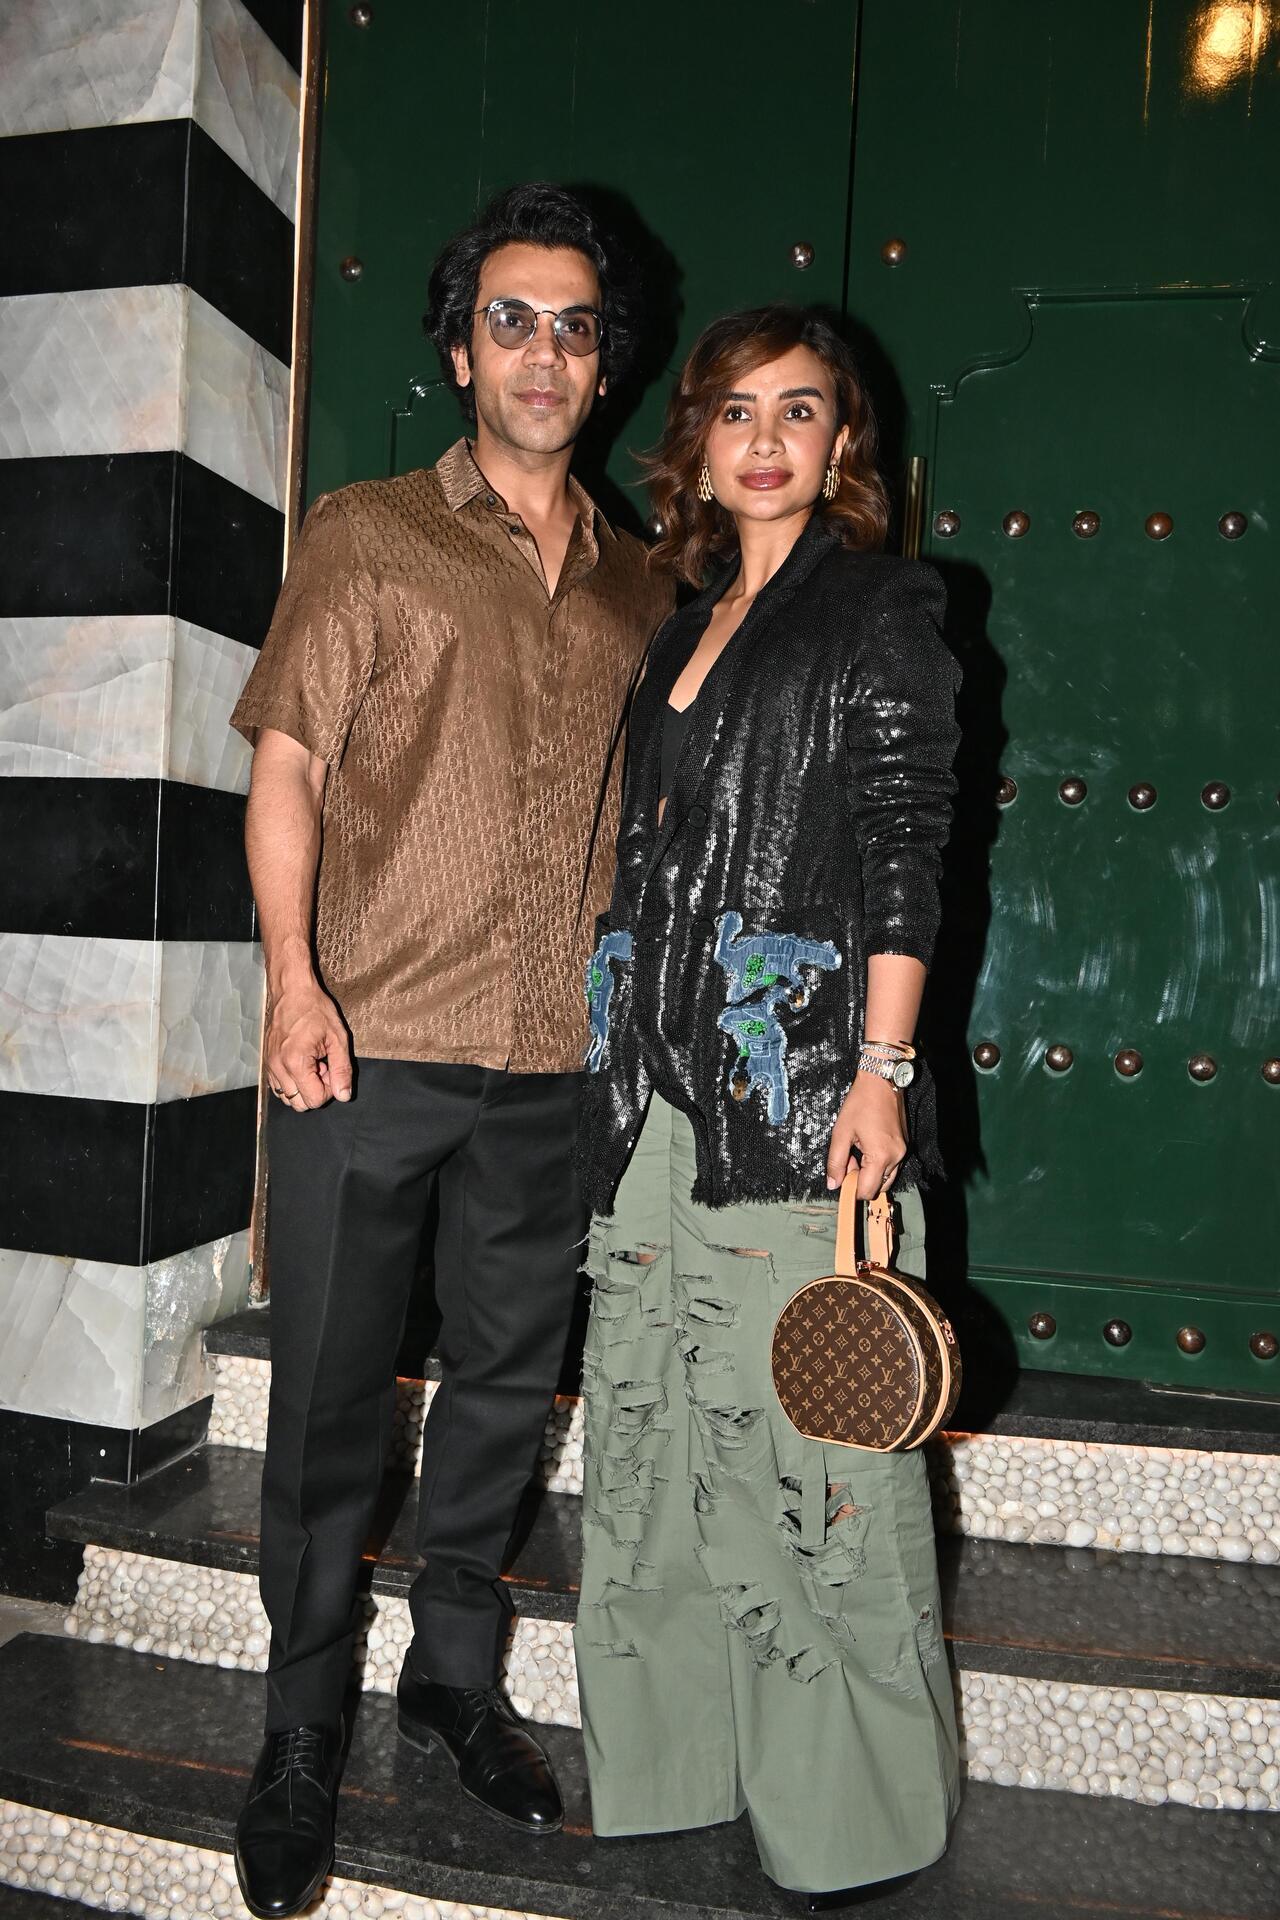 B-town's power couple Rajkummar Rao and Patralekhaa arrived in fashionable yet chic outfits. 